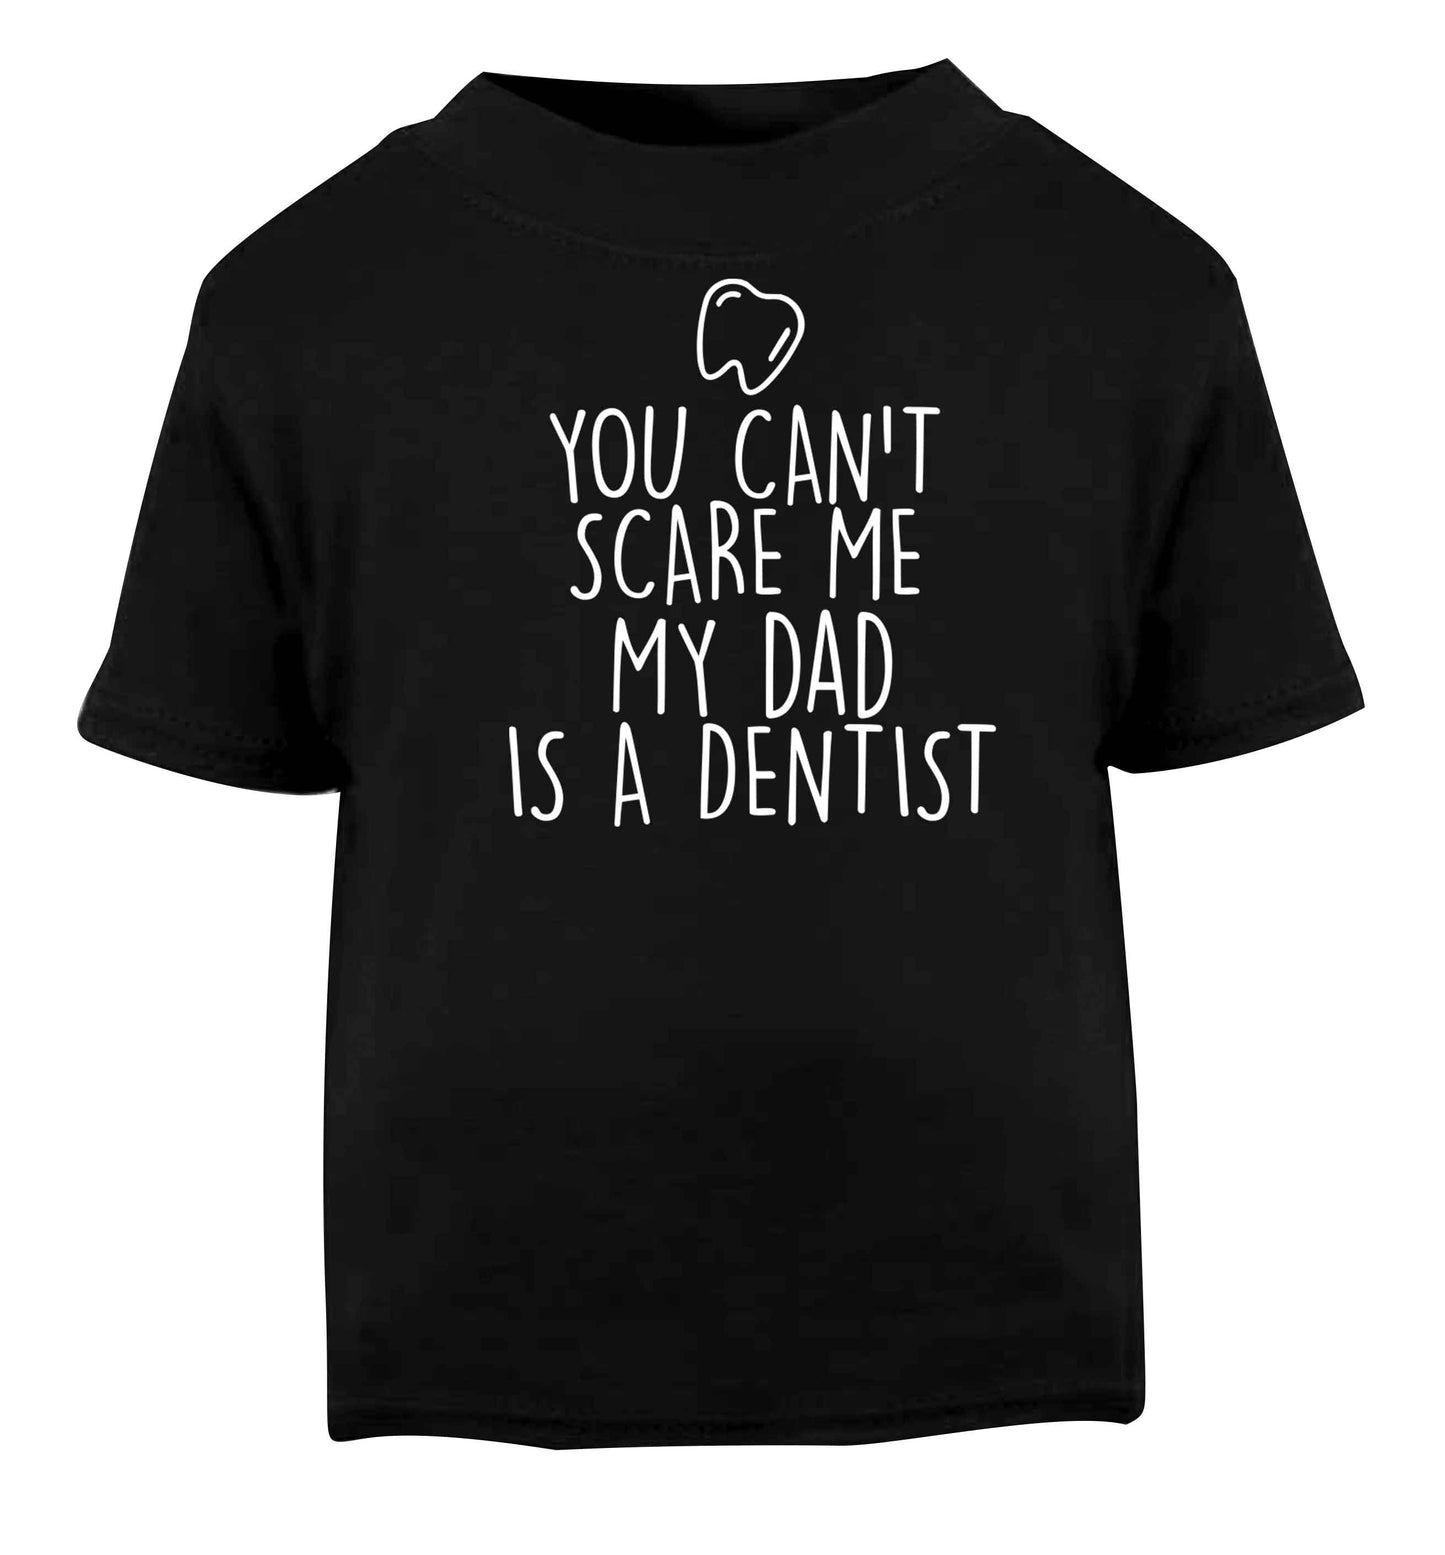 You can't scare me my dad is a dentist Black baby toddler Tshirt 2 years